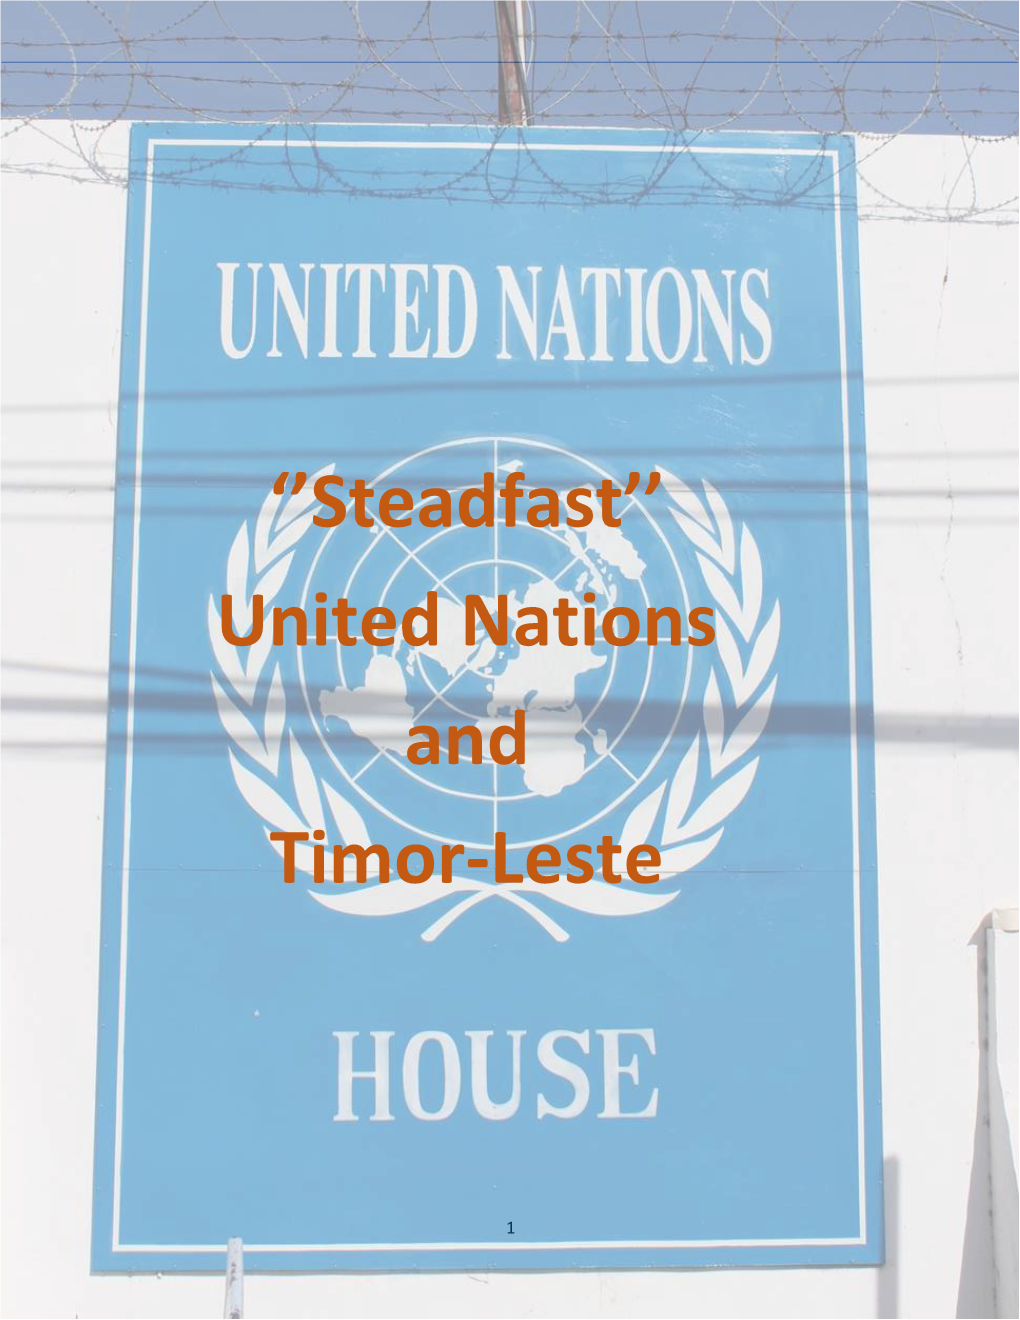 ''Steadfast'' United Nations and Timor-Leste